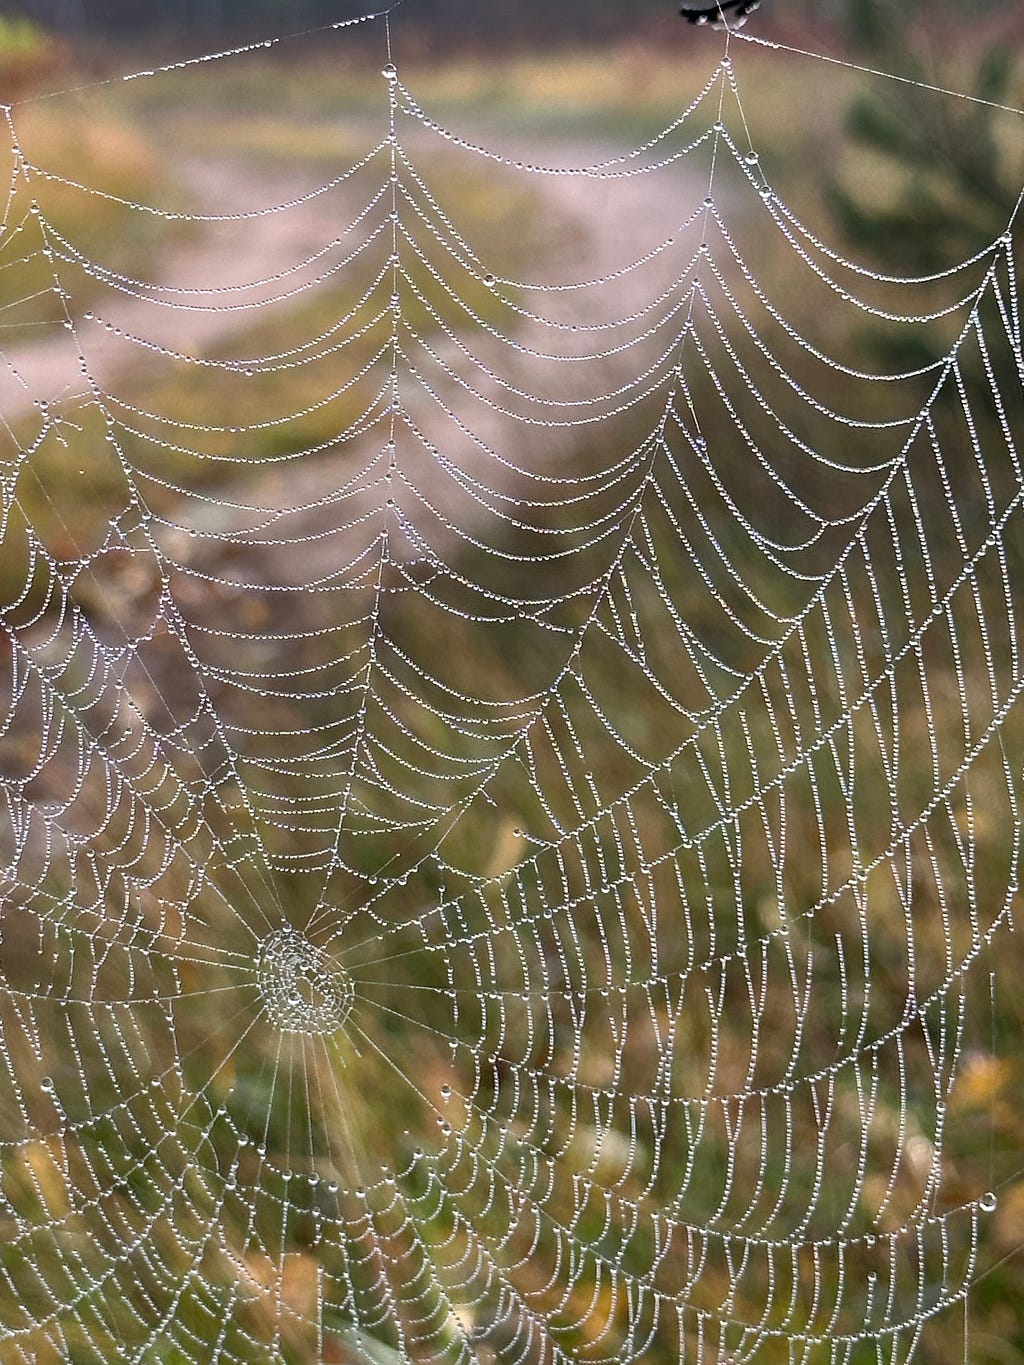 Large spider net after a rain